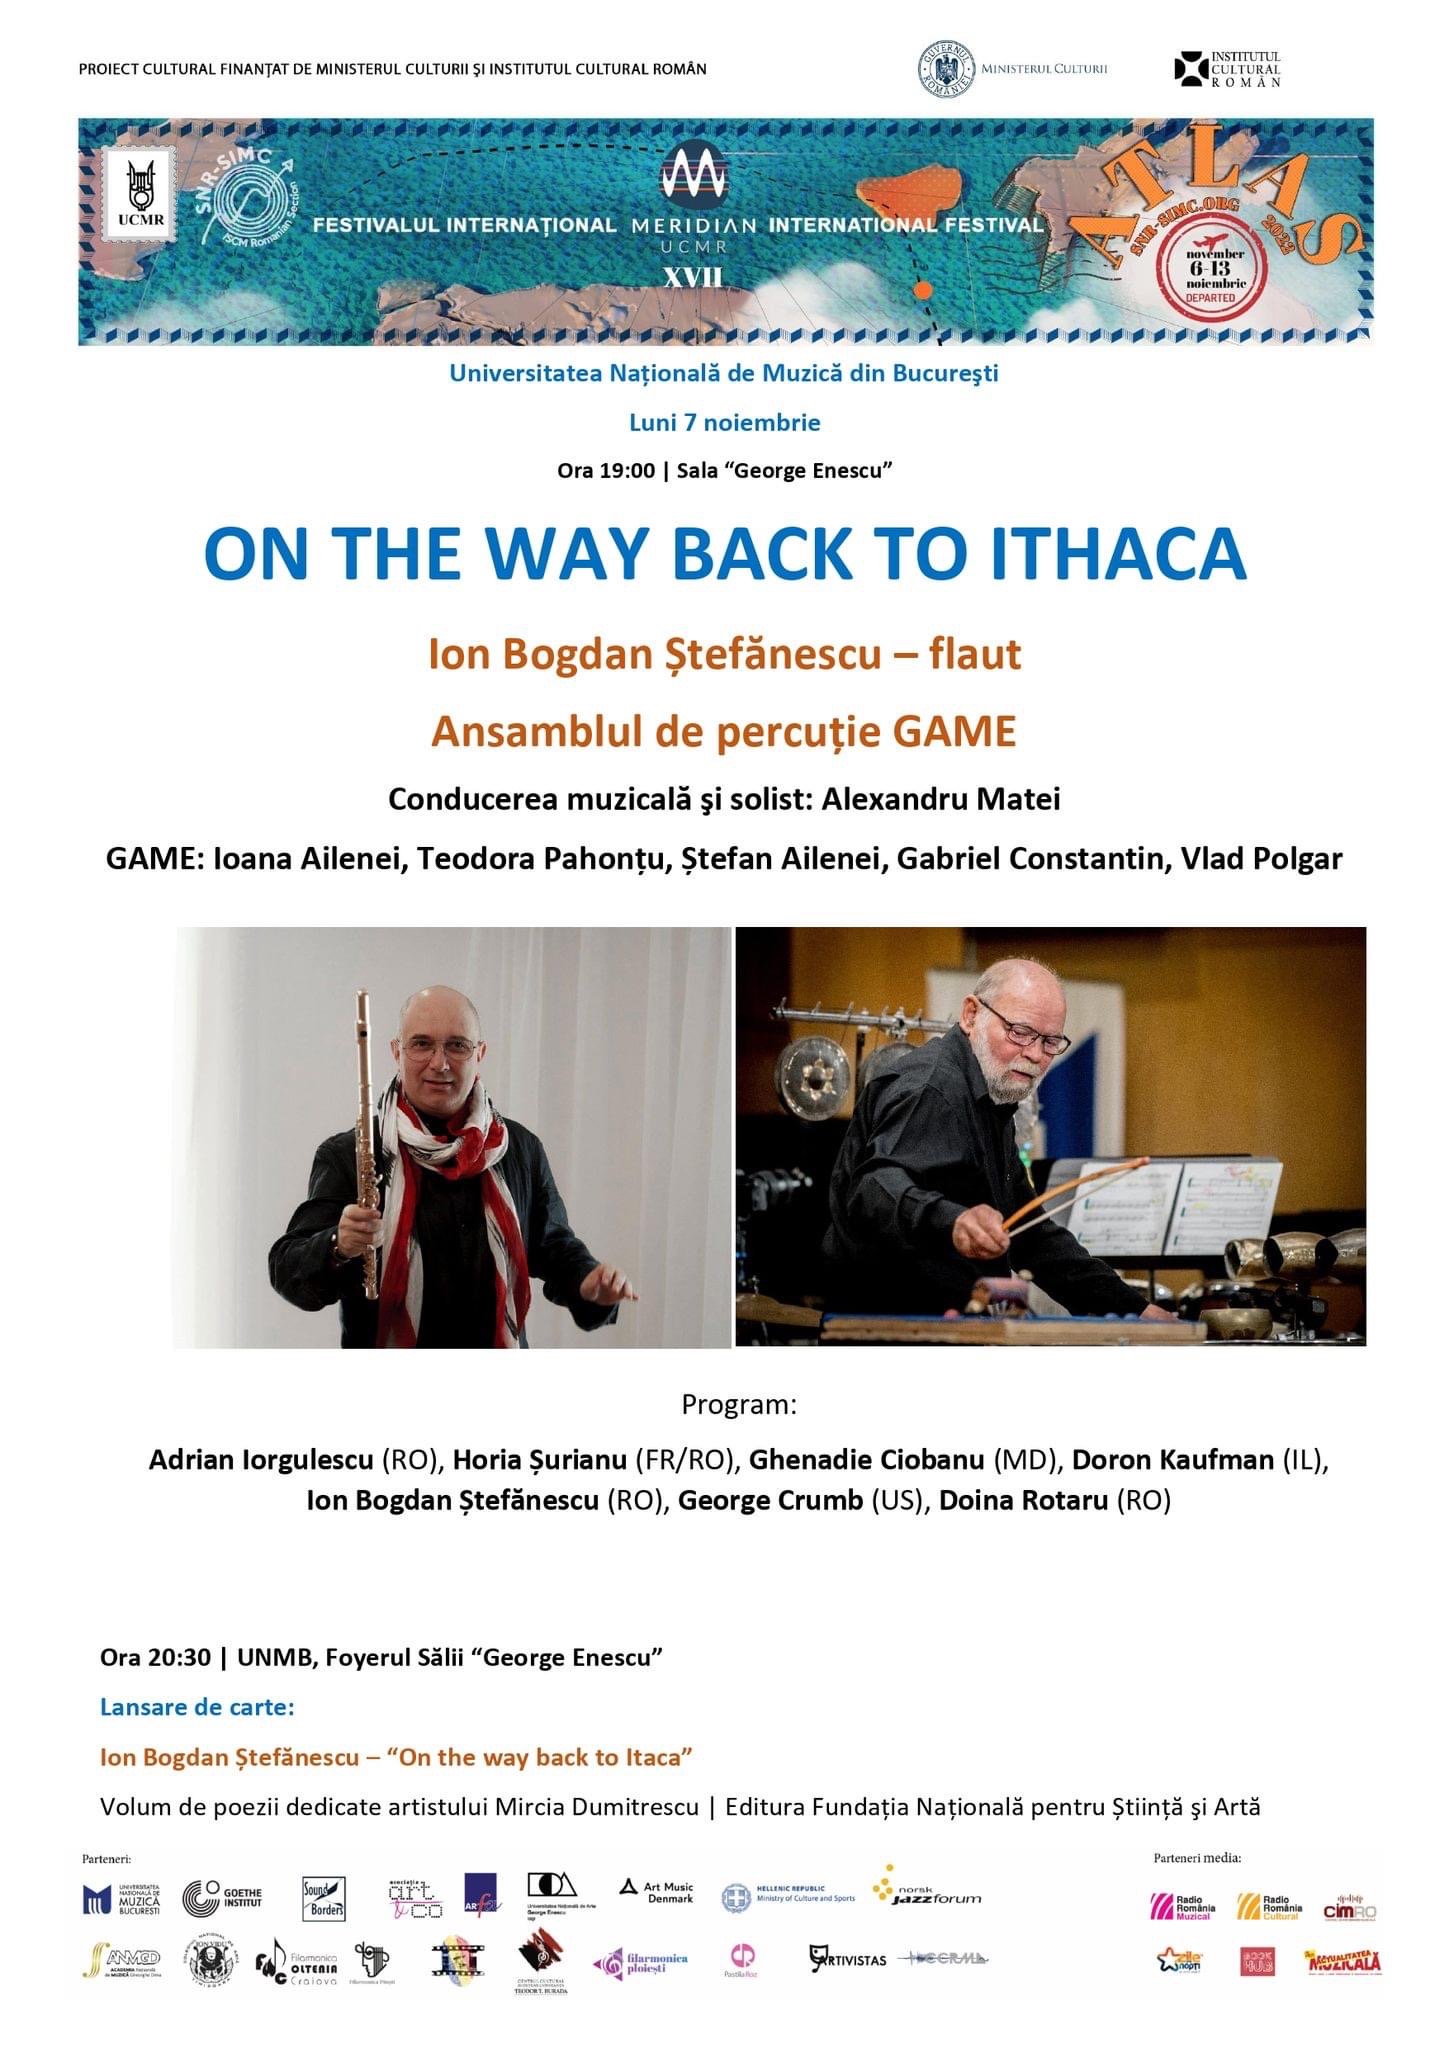 On the way back to Ithaca –  Meridian International Festival